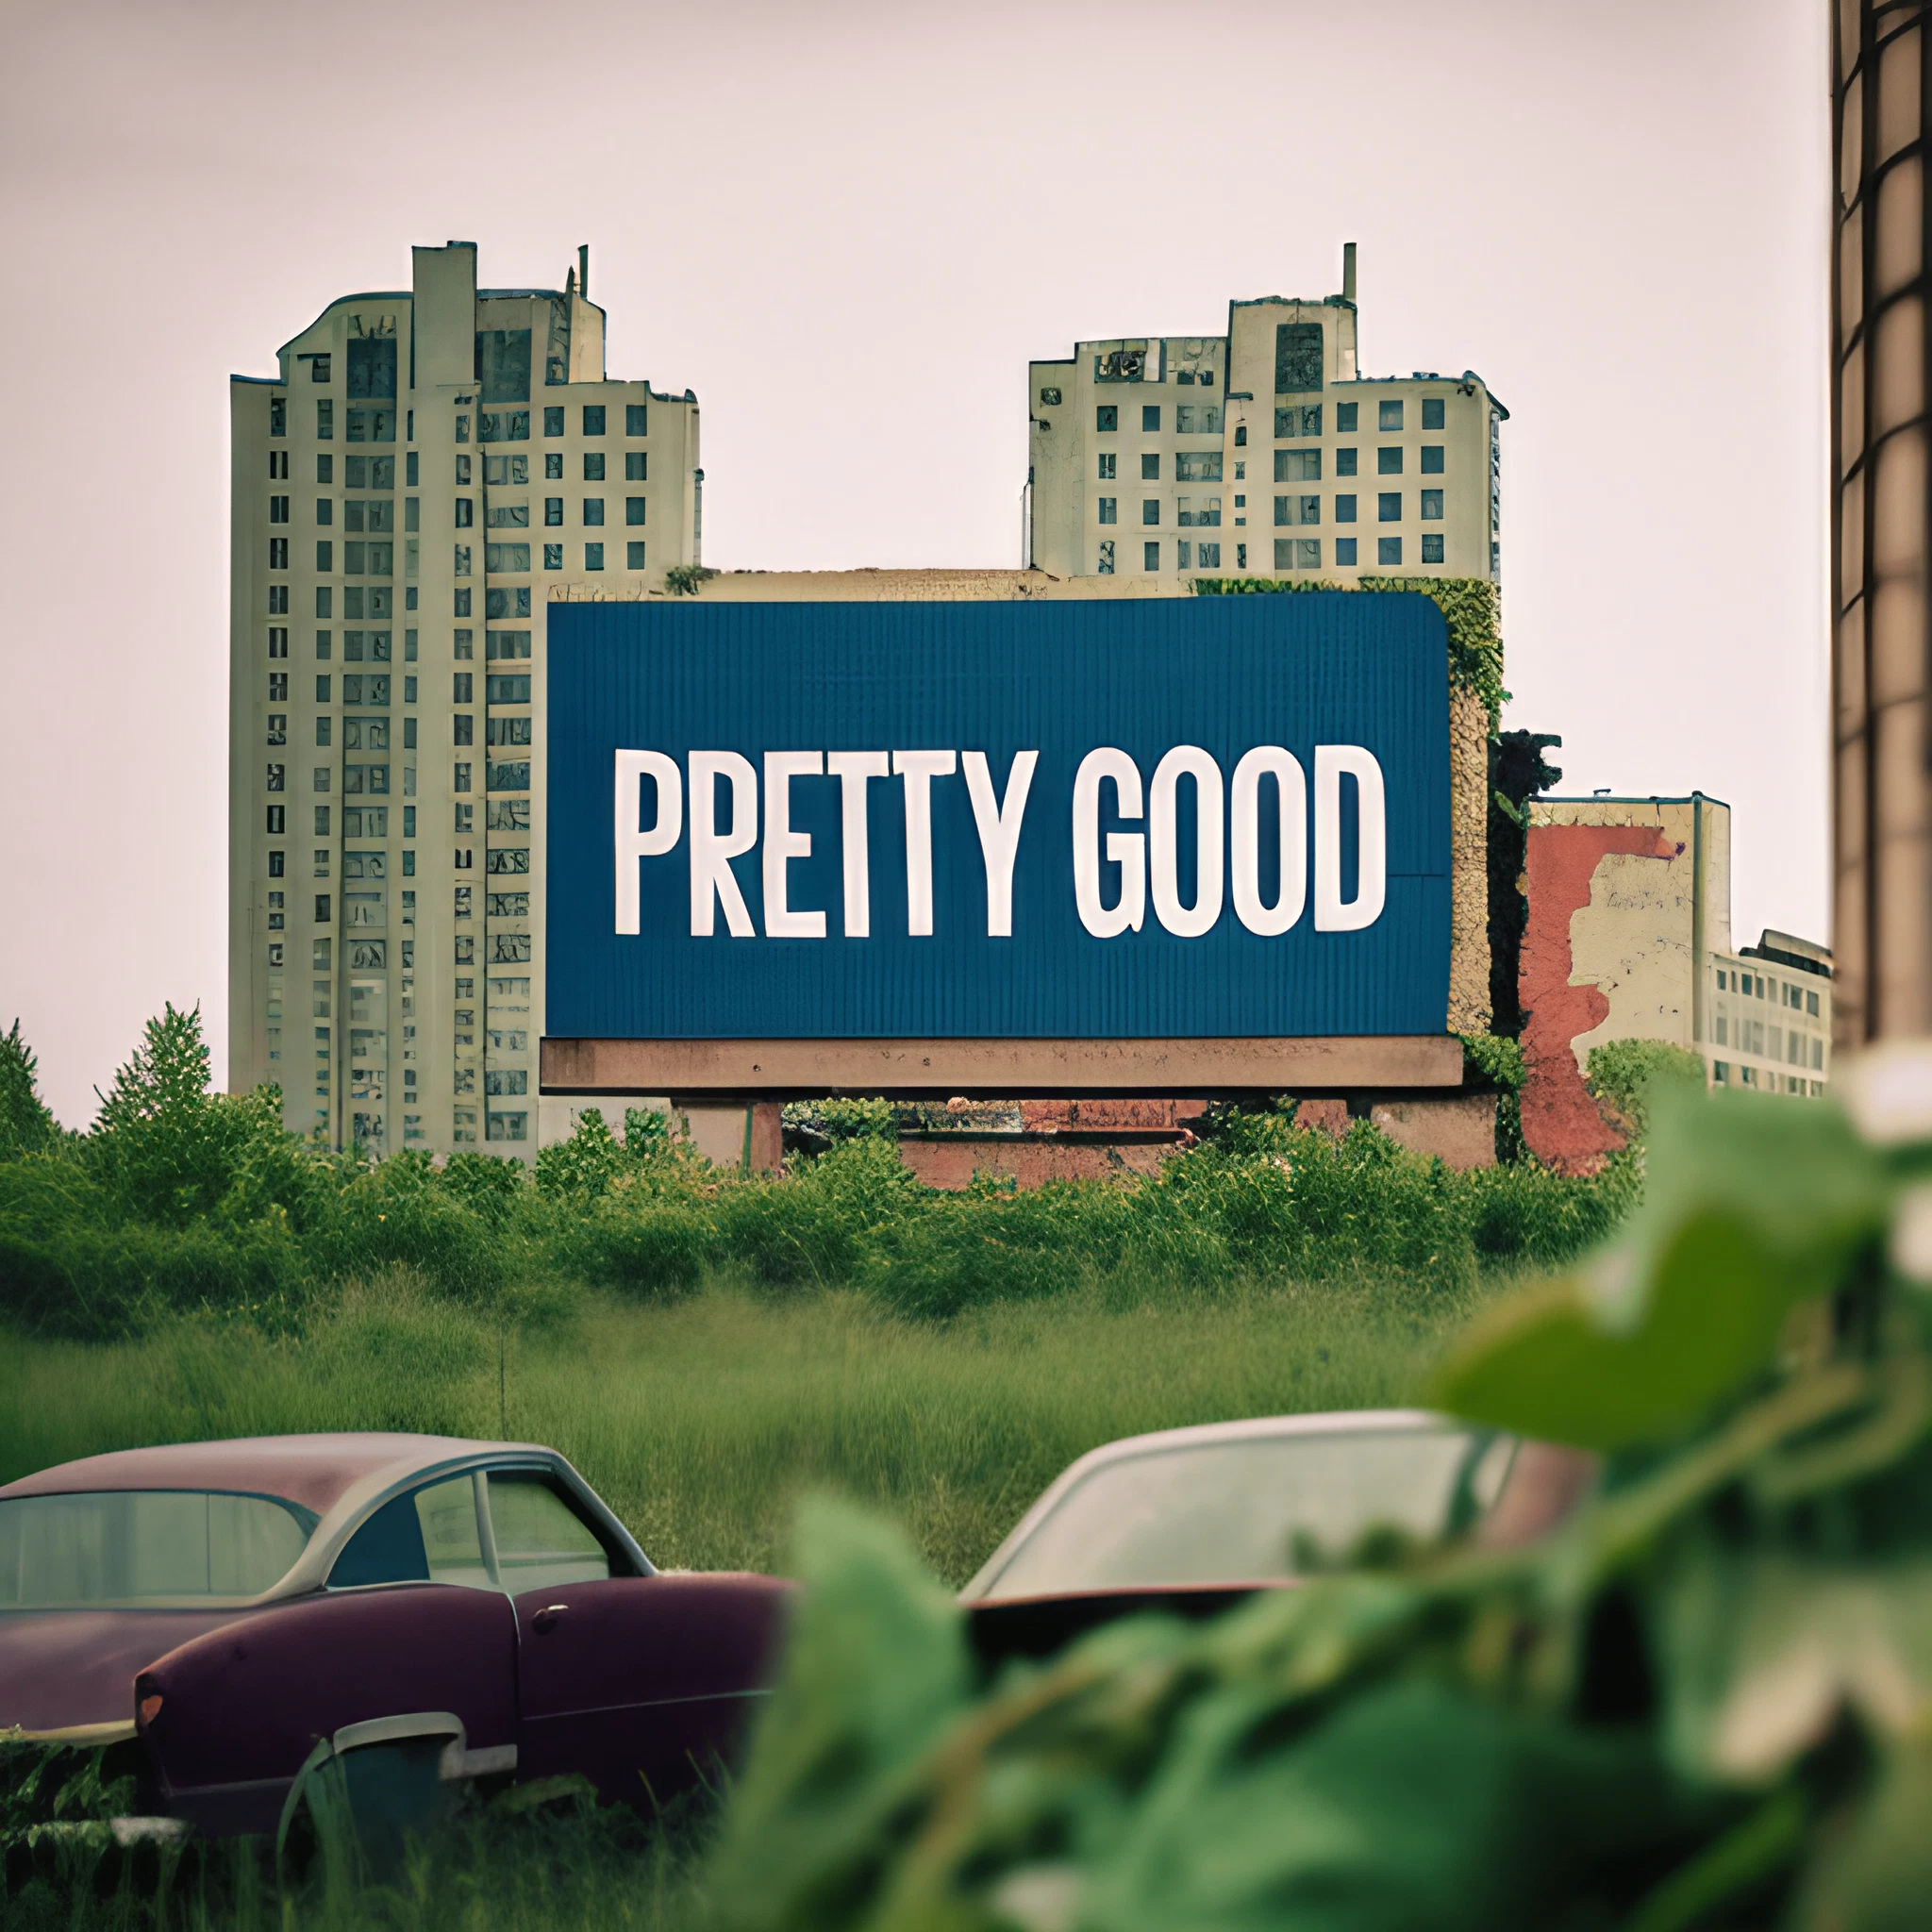 generated image of sign saying pretty good using Stable Diffusion